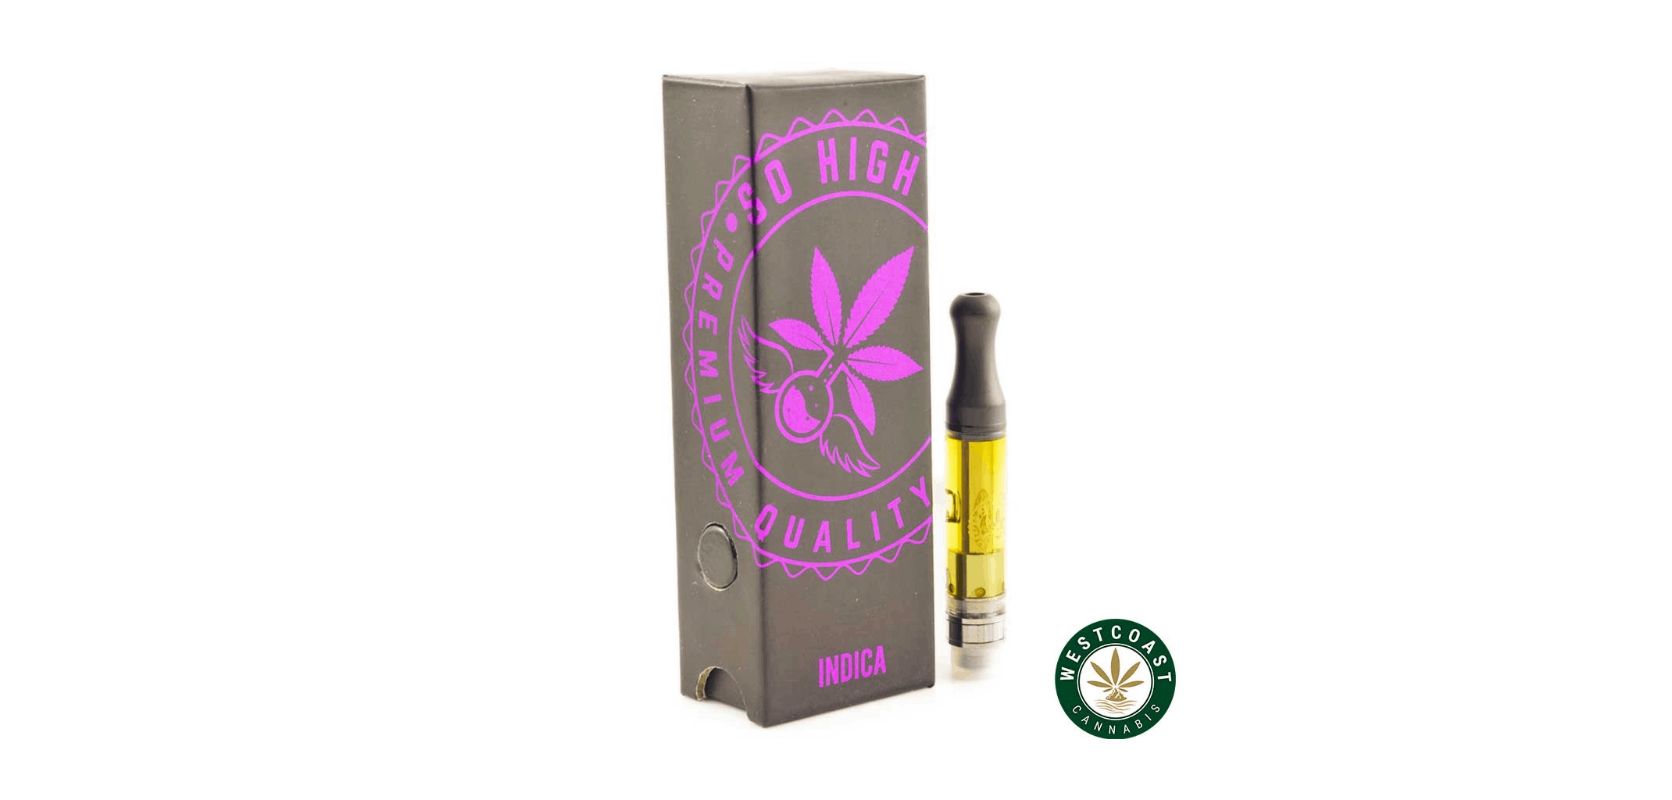 If you’re looking for the ideal nighttime smoke, you should try our premium Ice Cream Cookies cartridge from So High Extracts.